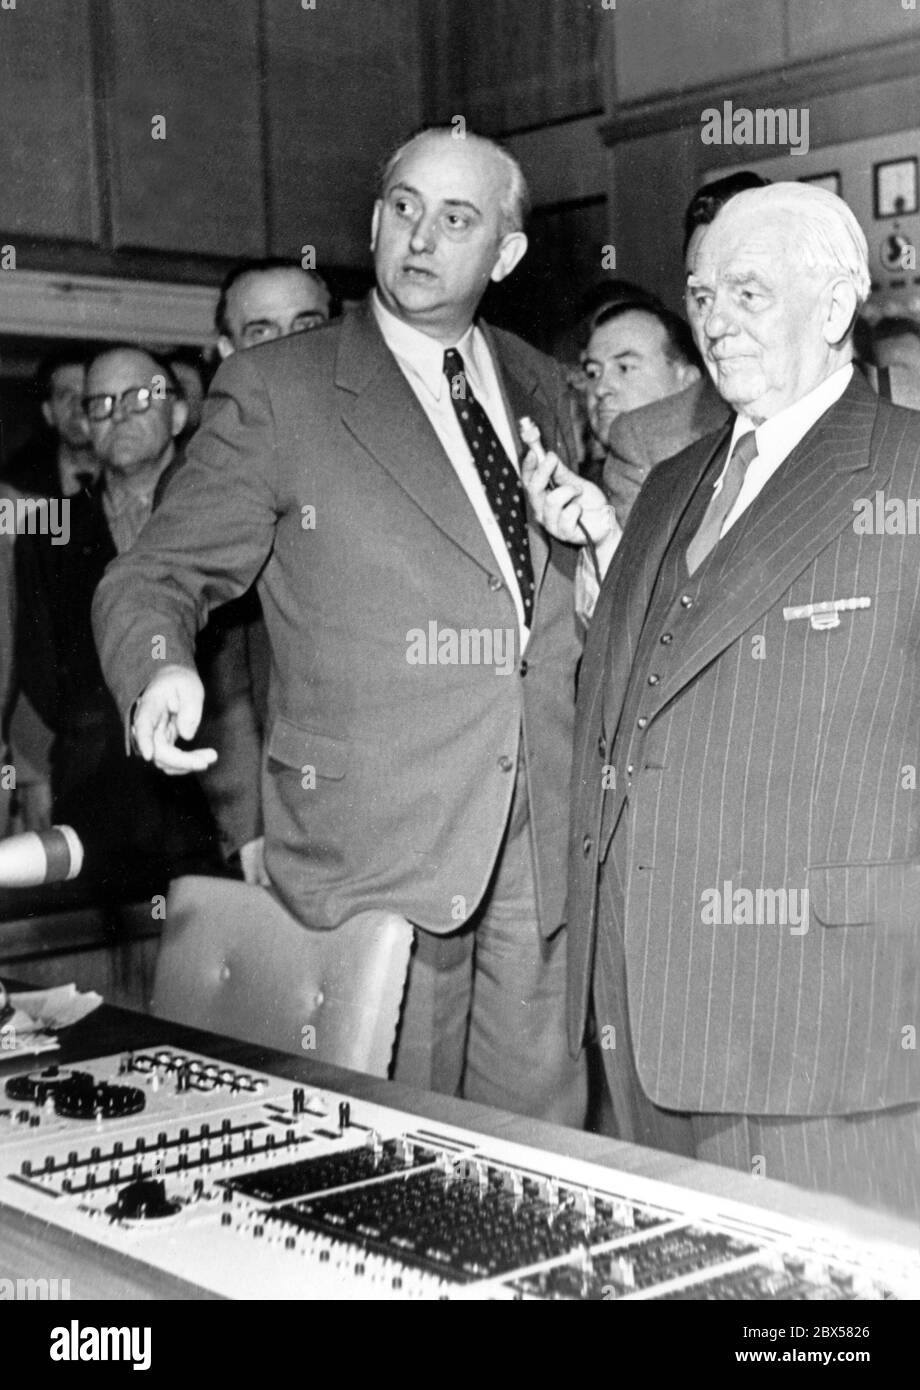 President of the GDR Wilhelm Pieck visited the Rundfunk der DDR on May 27, 1956 in Nalepastrasse in Berlin-Oberschoeneweide, where all radio programs of the GDR (Radio DDR, Stimme der DDR, Deutschlandsender, Berliner Rundfunk, Berliner Welle and the foreign radio station Radio Berlin International RBI) were produced until 1990. Pieck listens to the explanation of Gerhard Probst, Federal Deputy Minister of Post and Telecommunications responsible for broadcasting and television, in the control room of the technical equipment. Stock Photo